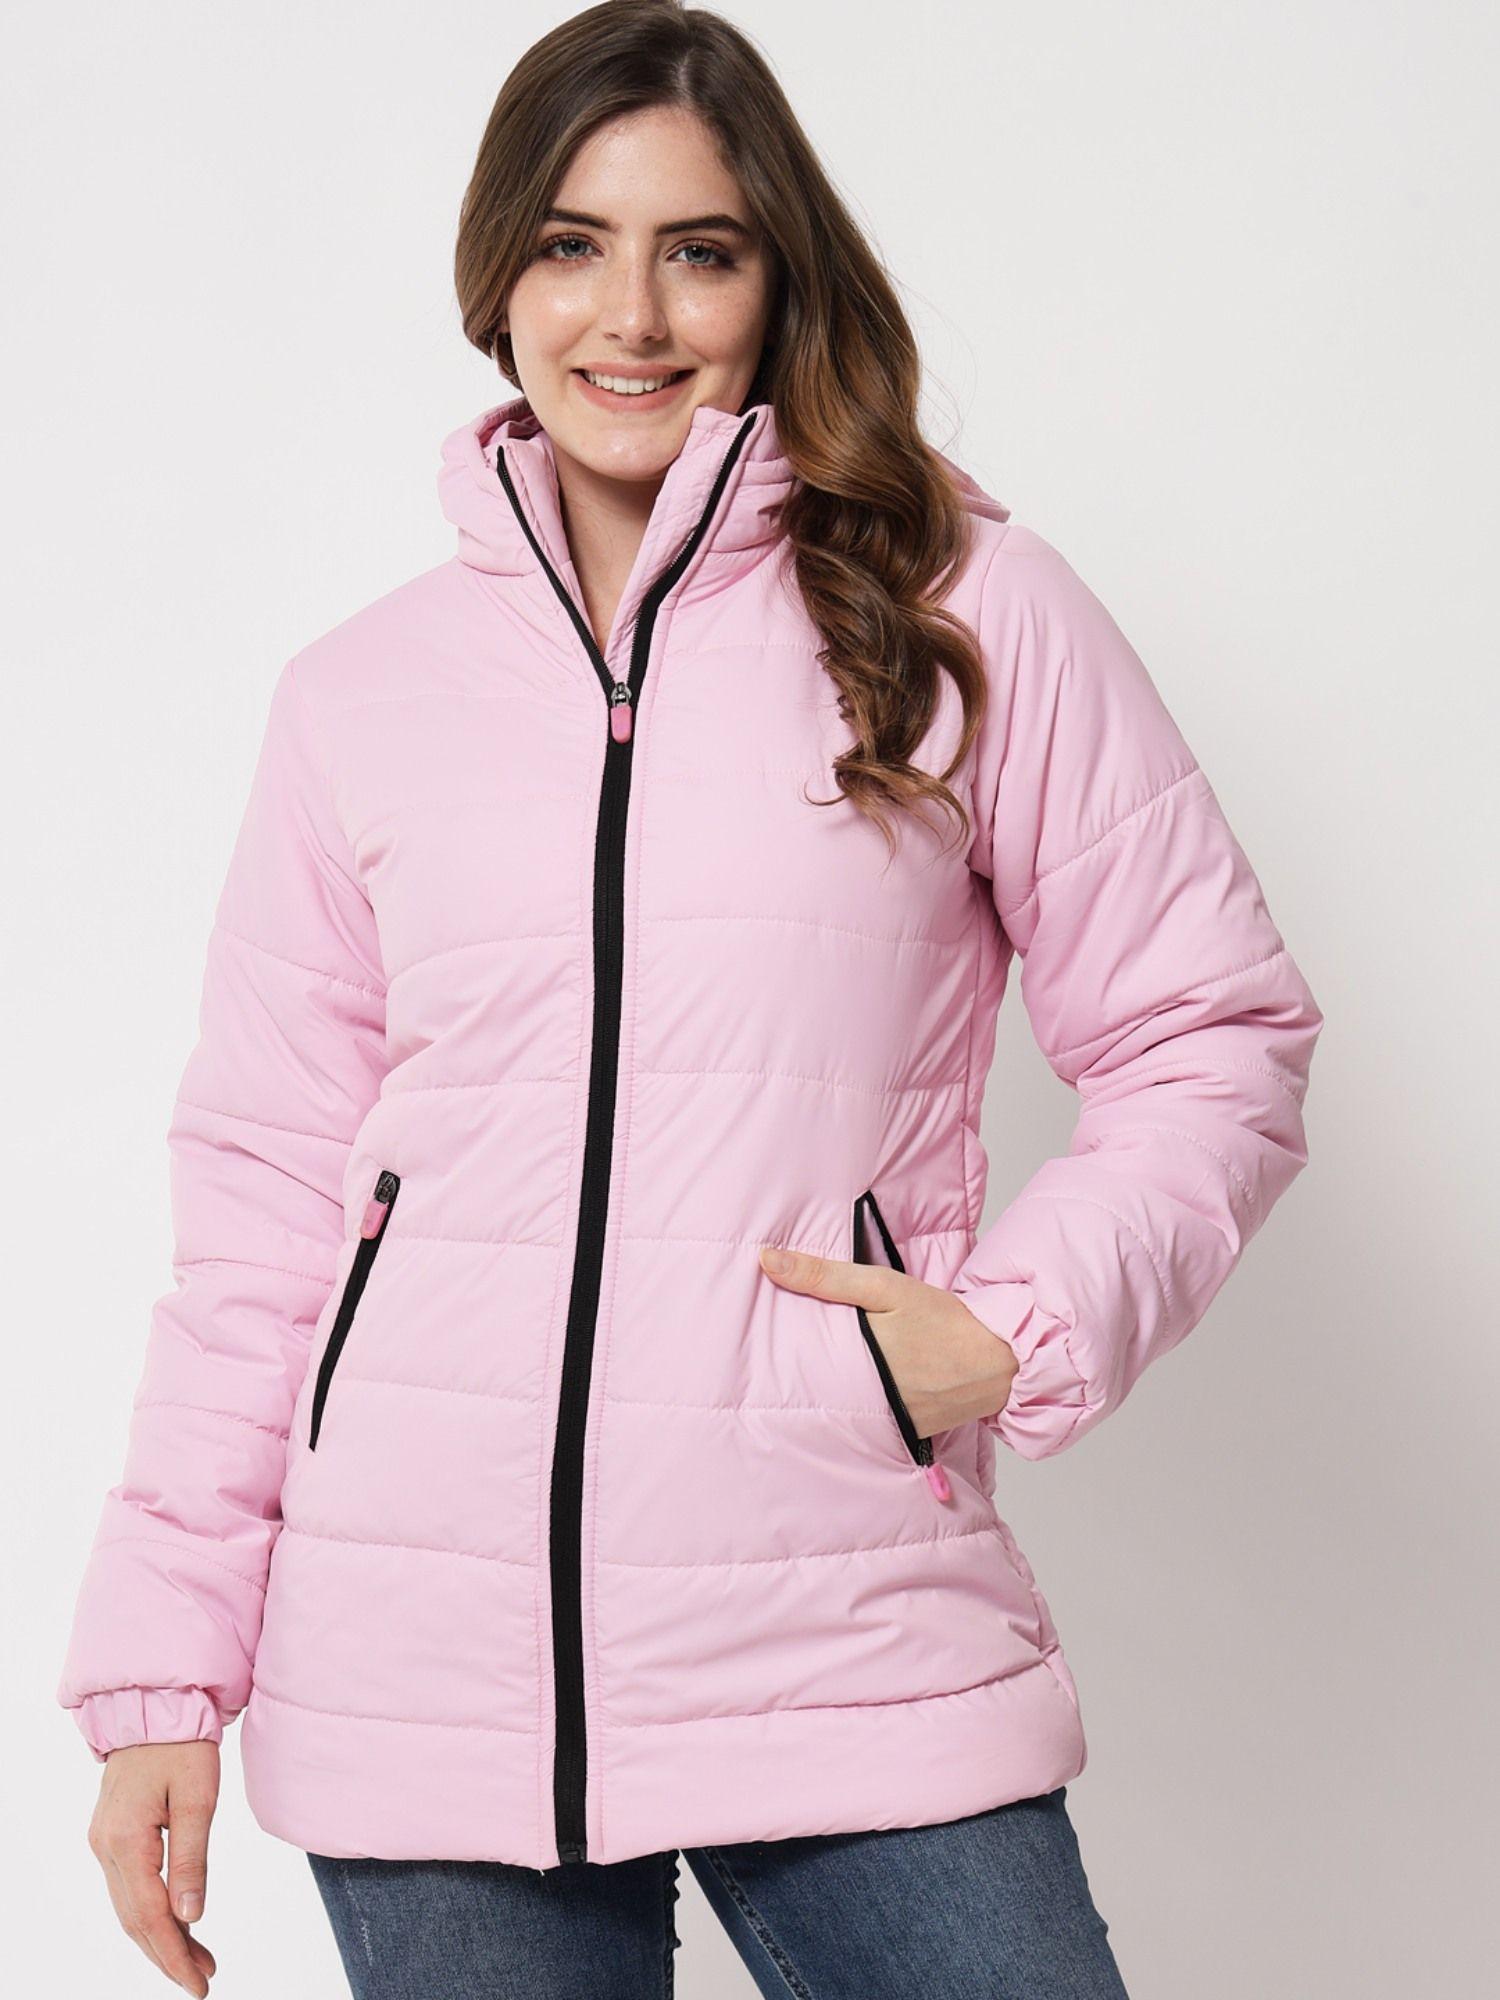 full sleeve solid women pink puffer jacket